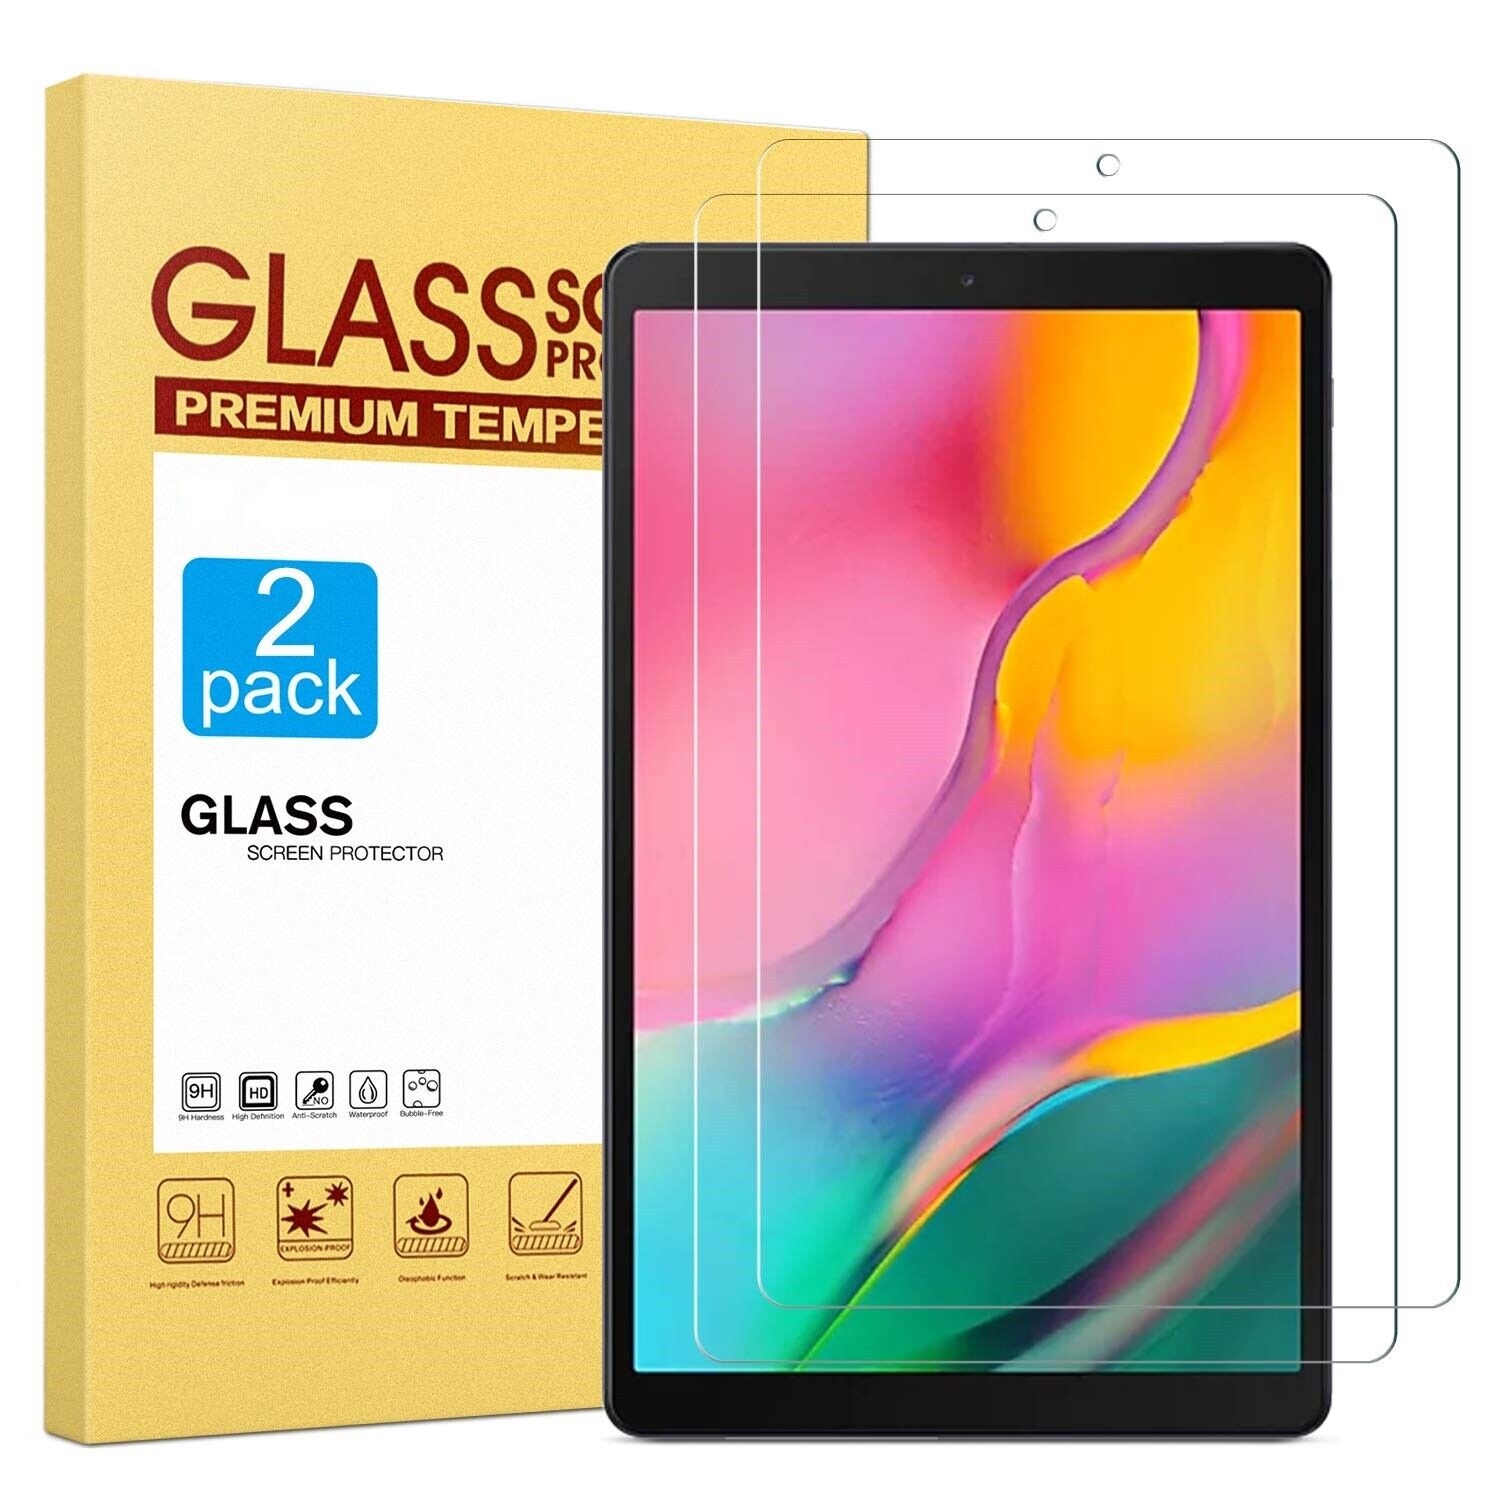 2 PCS Tempered Glass Screen Protector for Samsung Galaxy Tab A 10.1 SM-T510/T515